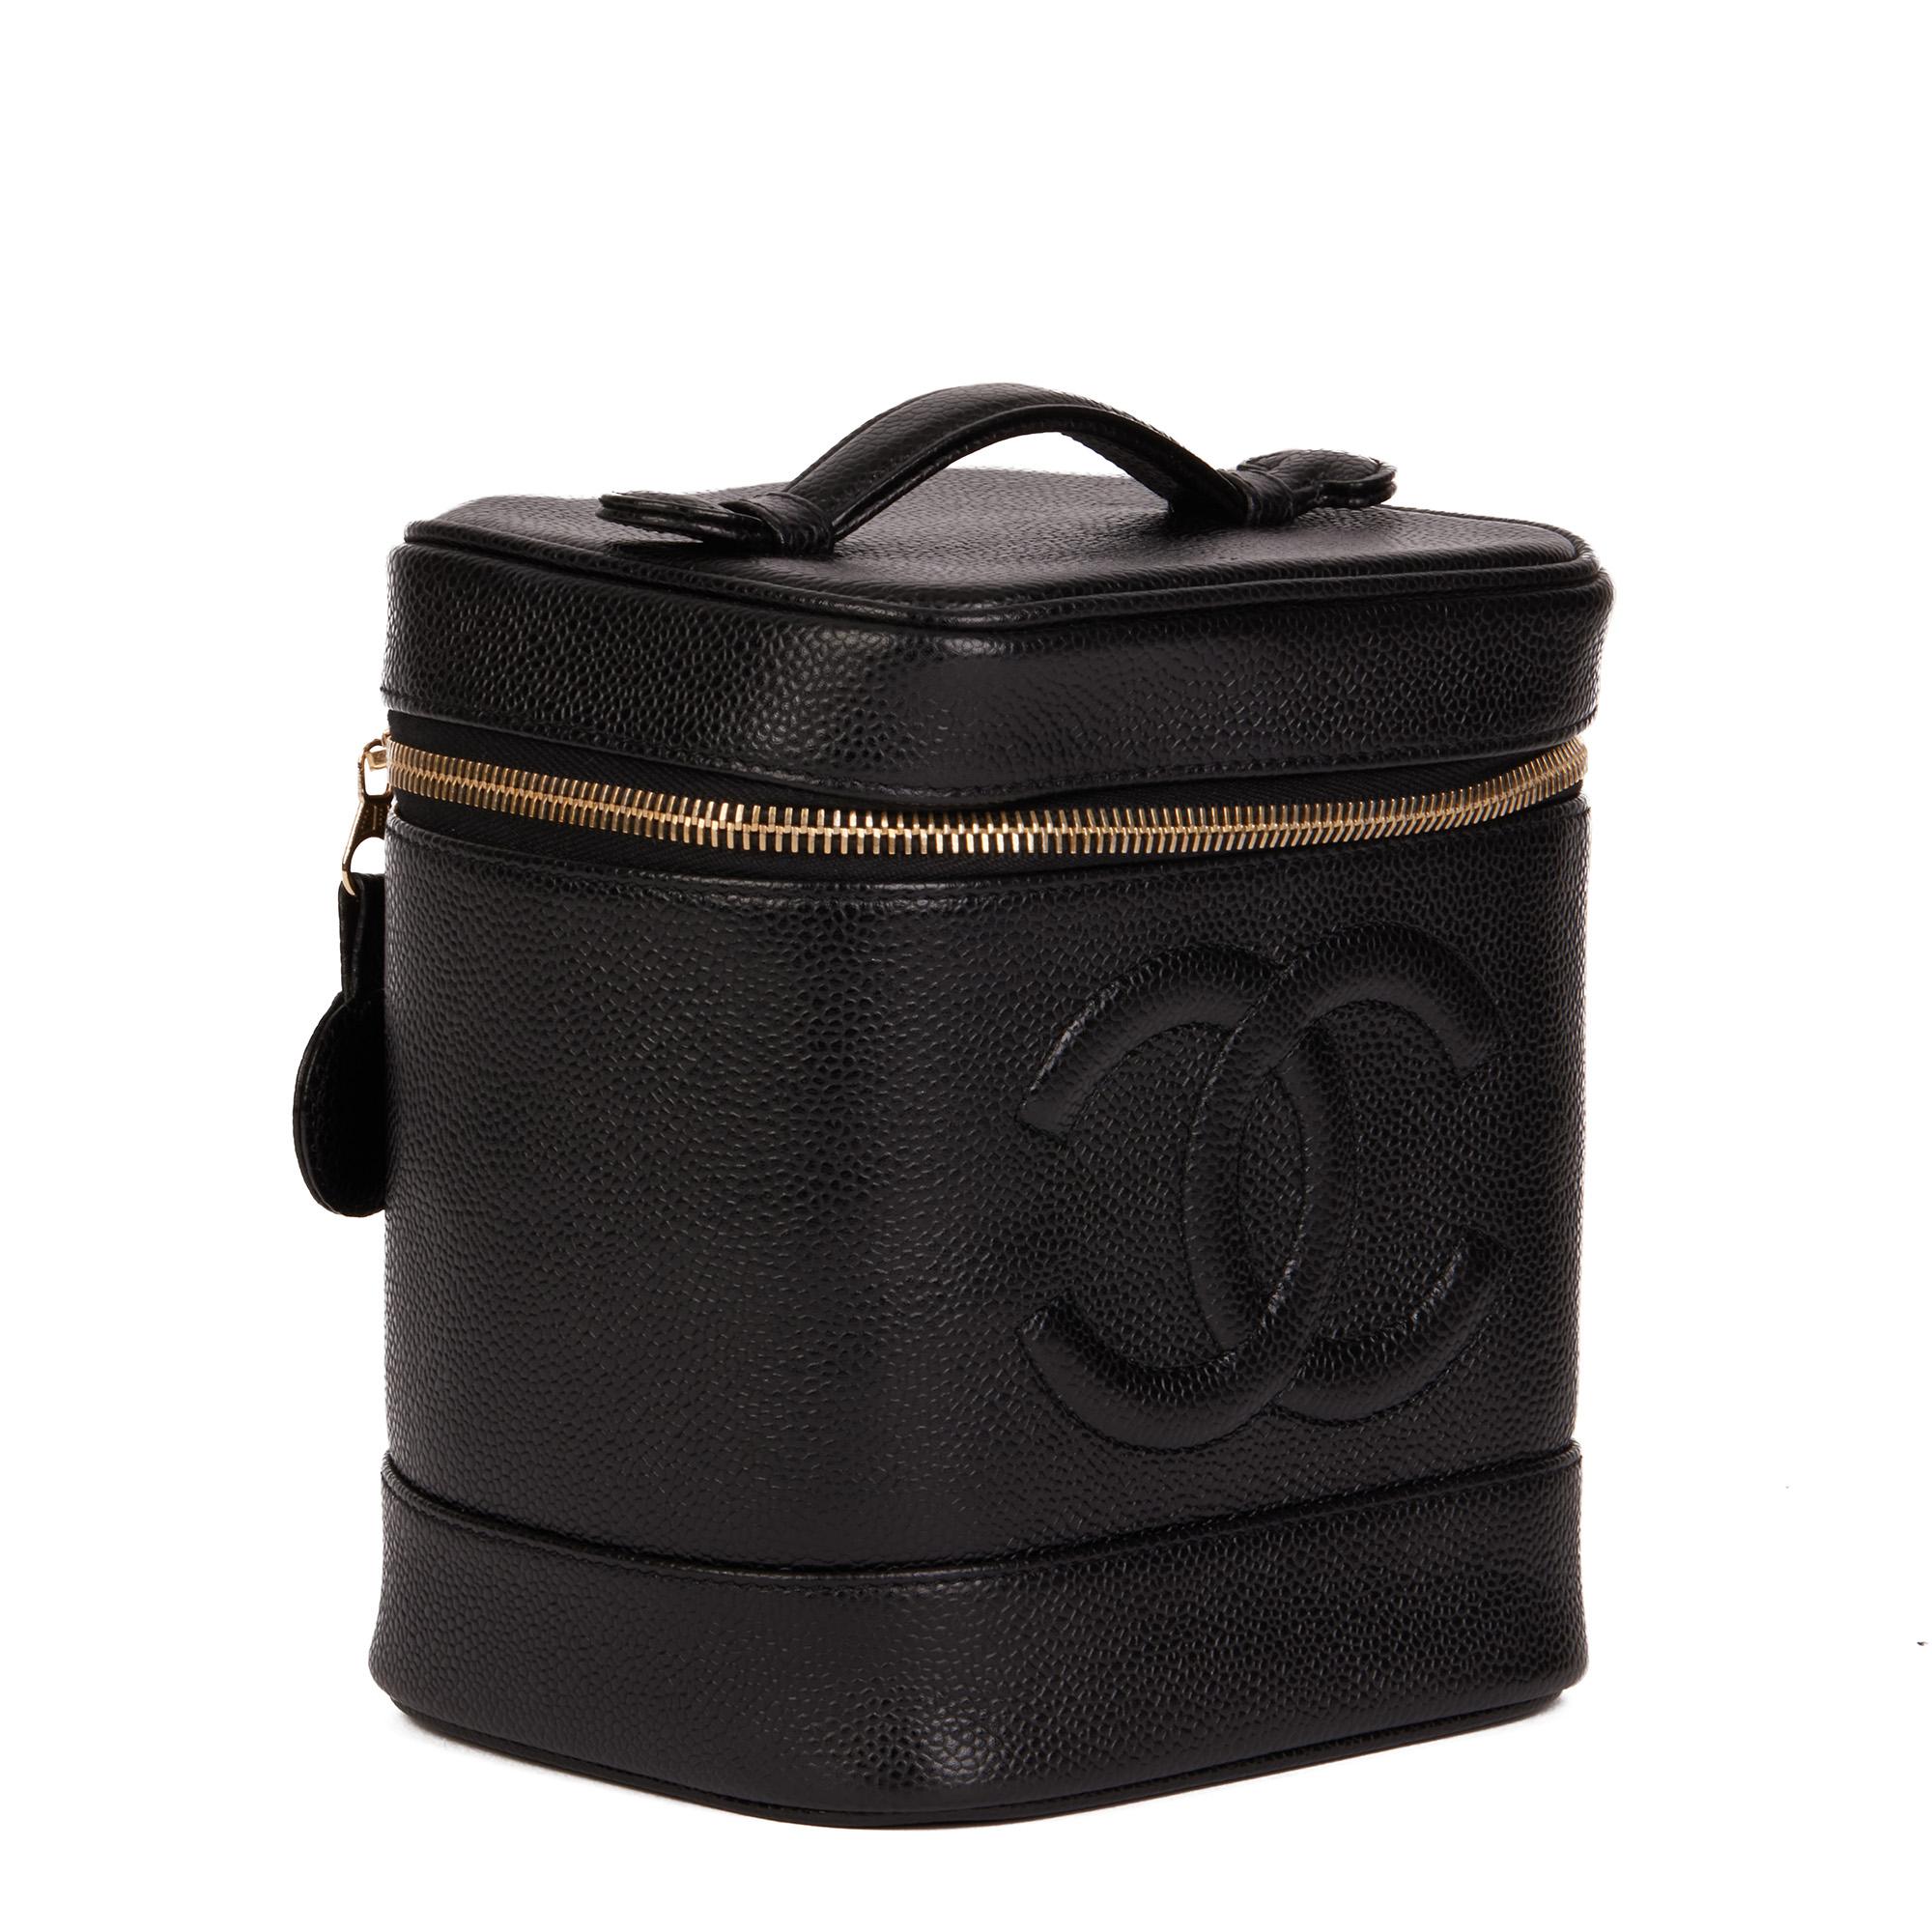 Chanel BLACK CAVIAR LEATHER VINTAGE TIMELESS VANITY CASE

CONDITION NOTES
The exterior is in excellent condition with minimal signs of use.
The interior is in excellent condition with minimal signs of use.
The hardware is in excellent condition with